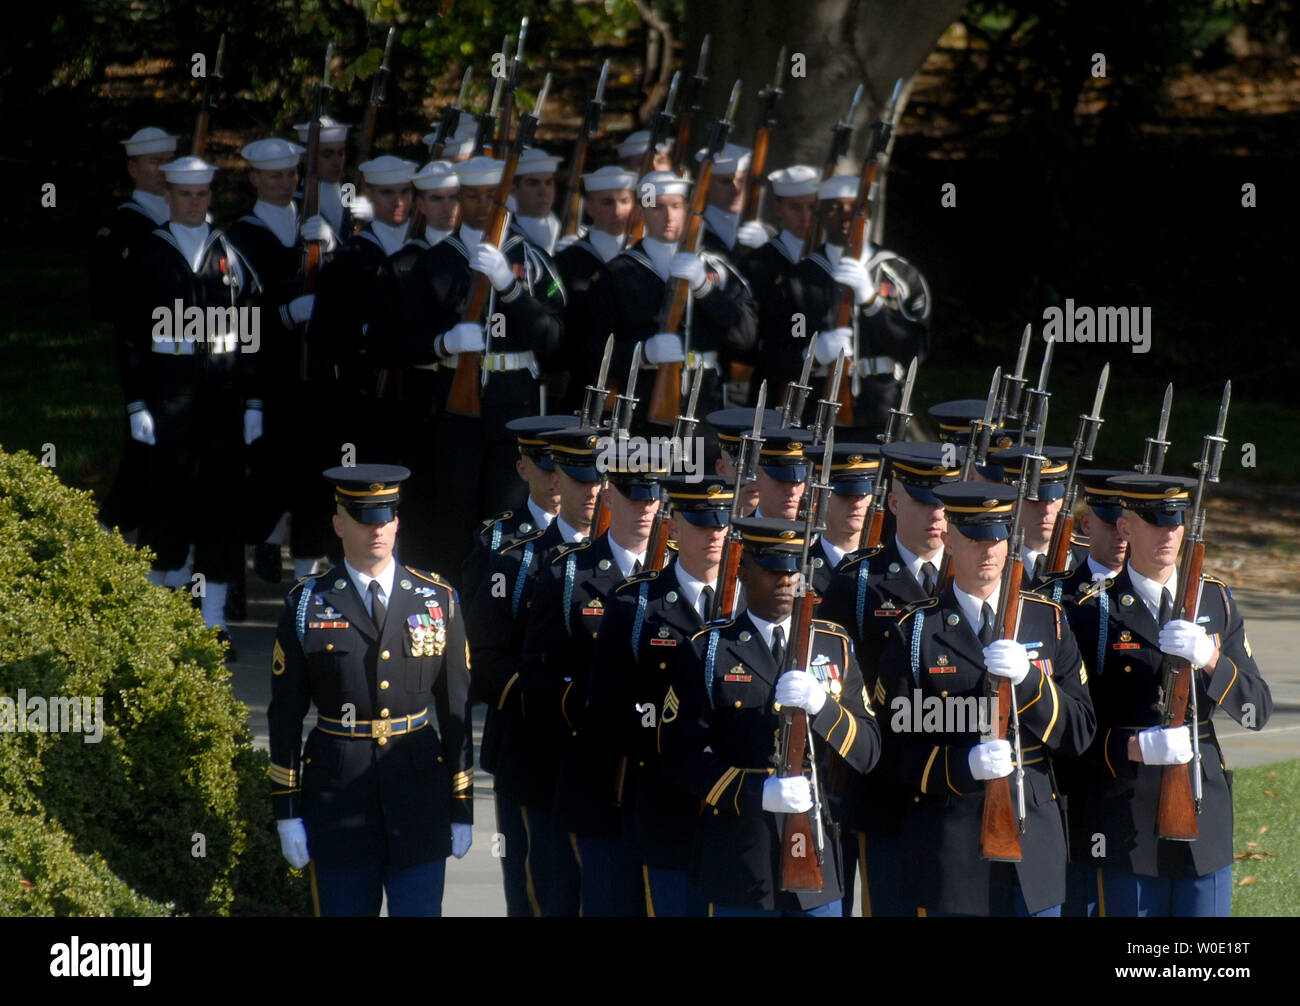 Members of the Navy and Army Honor Guard participate in a Veterans Day wreath laying ceremony at the Tomb of the Unknown Soldier at Arlington National Cemetary in Arlington, Virginia on November 11, 2007. (UPI Photo/Kevin Dietsch) Stock Photo